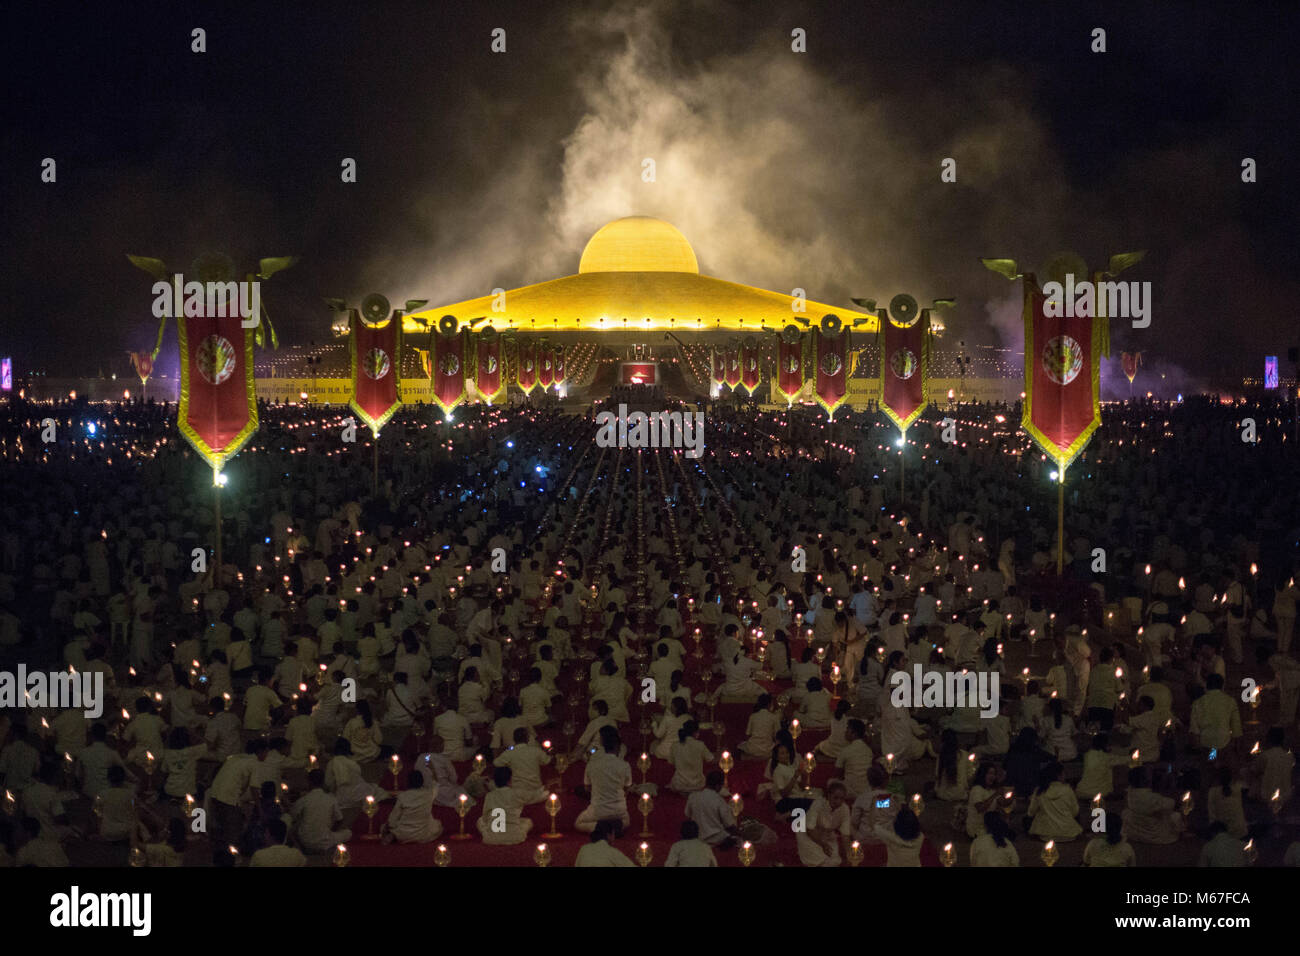 Bangkok, Pathum Thani, Thailand. 1st Mar, 2018. A general view of the Dhammakaya Temple during the yearly Makha Bucha ceremony in the north of Bangkok.Buddhist devotees celebrate the annual festival of Makha Bucha, one of the most important day for buddhists around the world. More than a thousand monks and hundred of thousand devotees were gathering at Dhammakaya Temple in Bangkok to attend the lighting ceremony. Credit: 1C0A9625.jpg/SOPA Images/ZUMA Wire/Alamy Live News Stock Photo